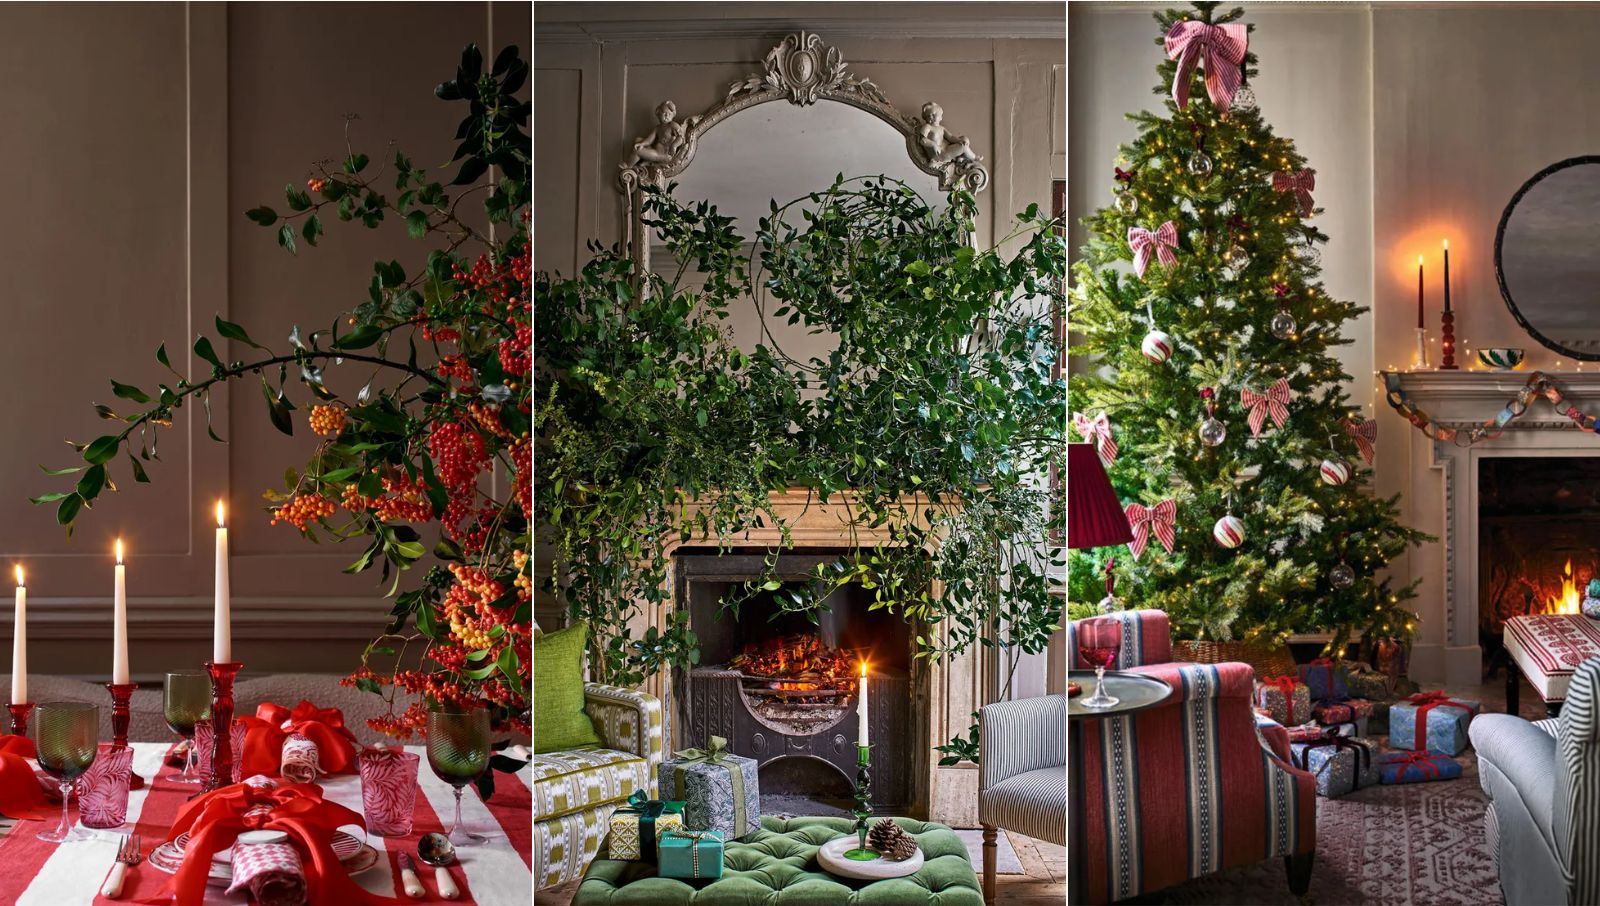 Instead of a Christmas tree this year we adorn a charming tree of branches, My desired home